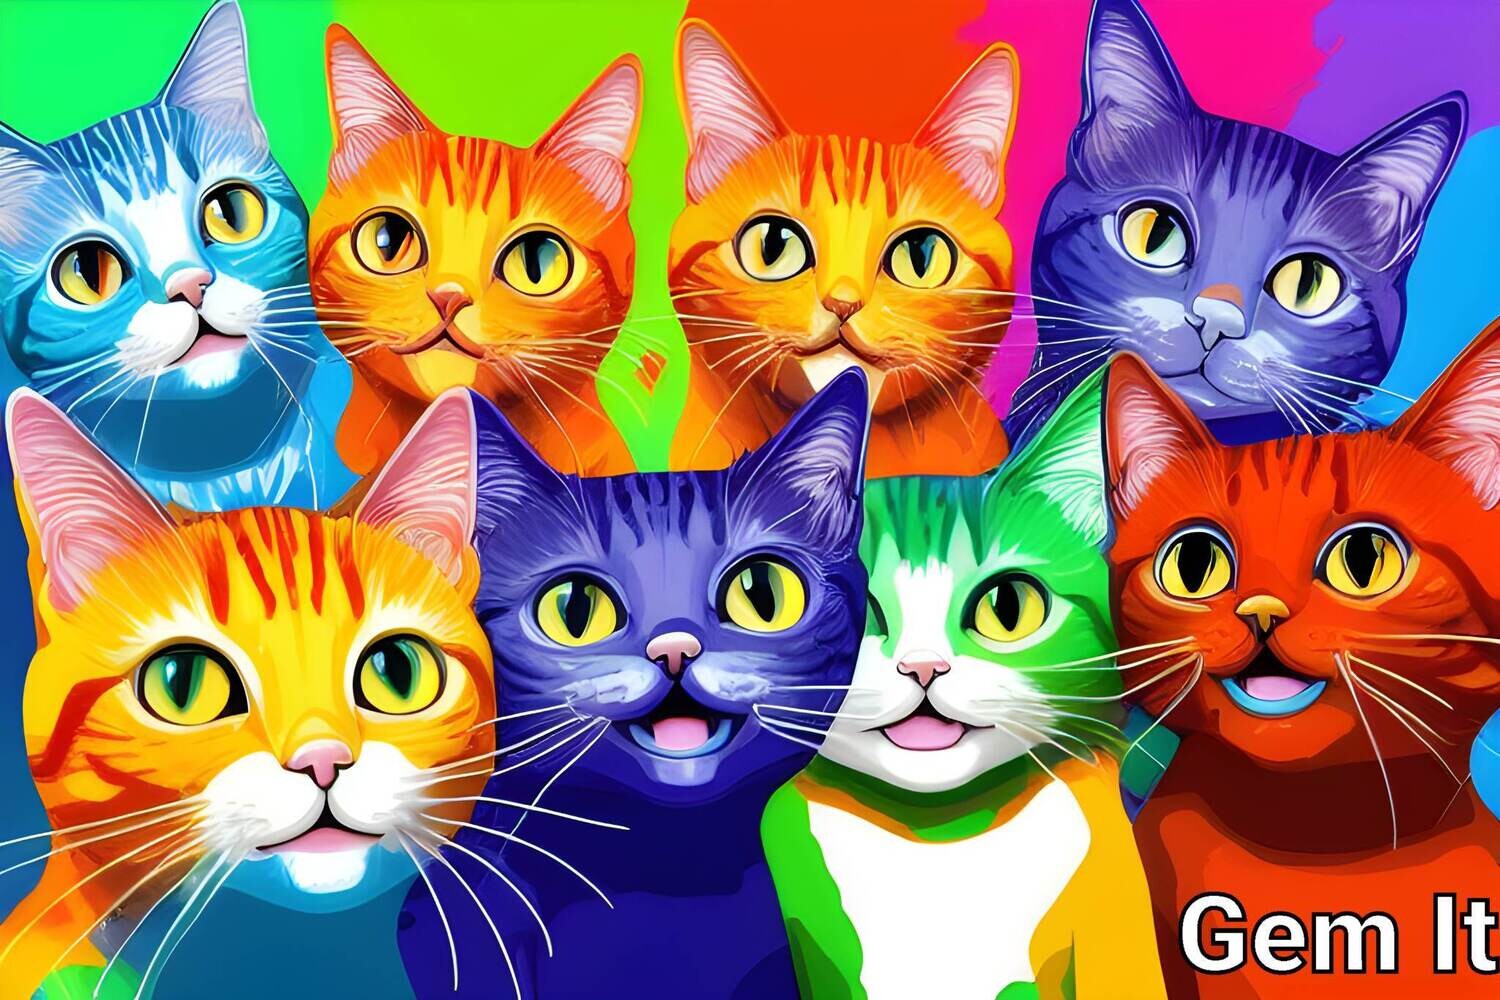 Cats Group Selfie 2 - Specially ordered for you. Delivery is approximately 4 - 6 weeks.